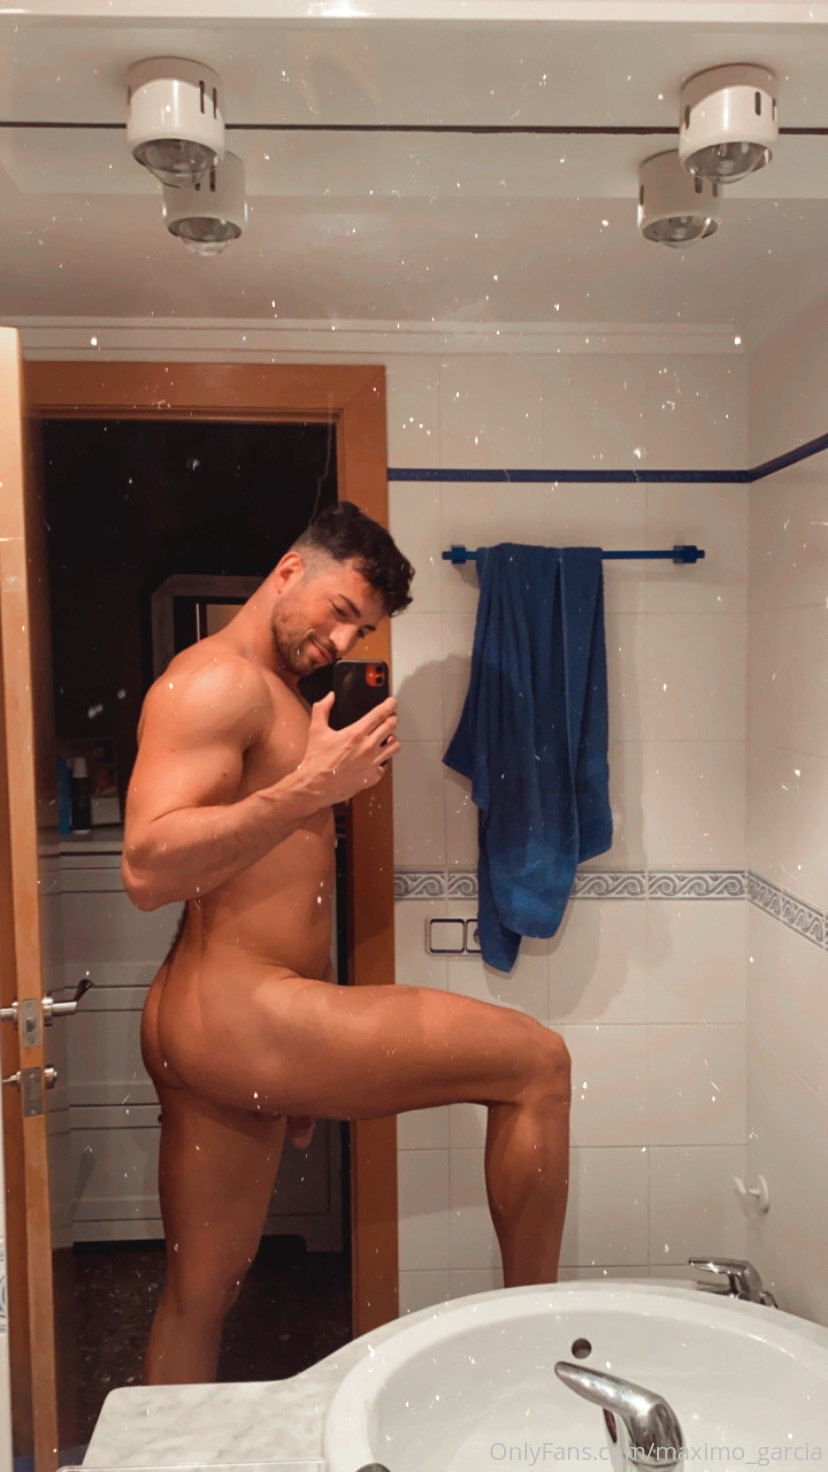 Maximo garcia onlyfans